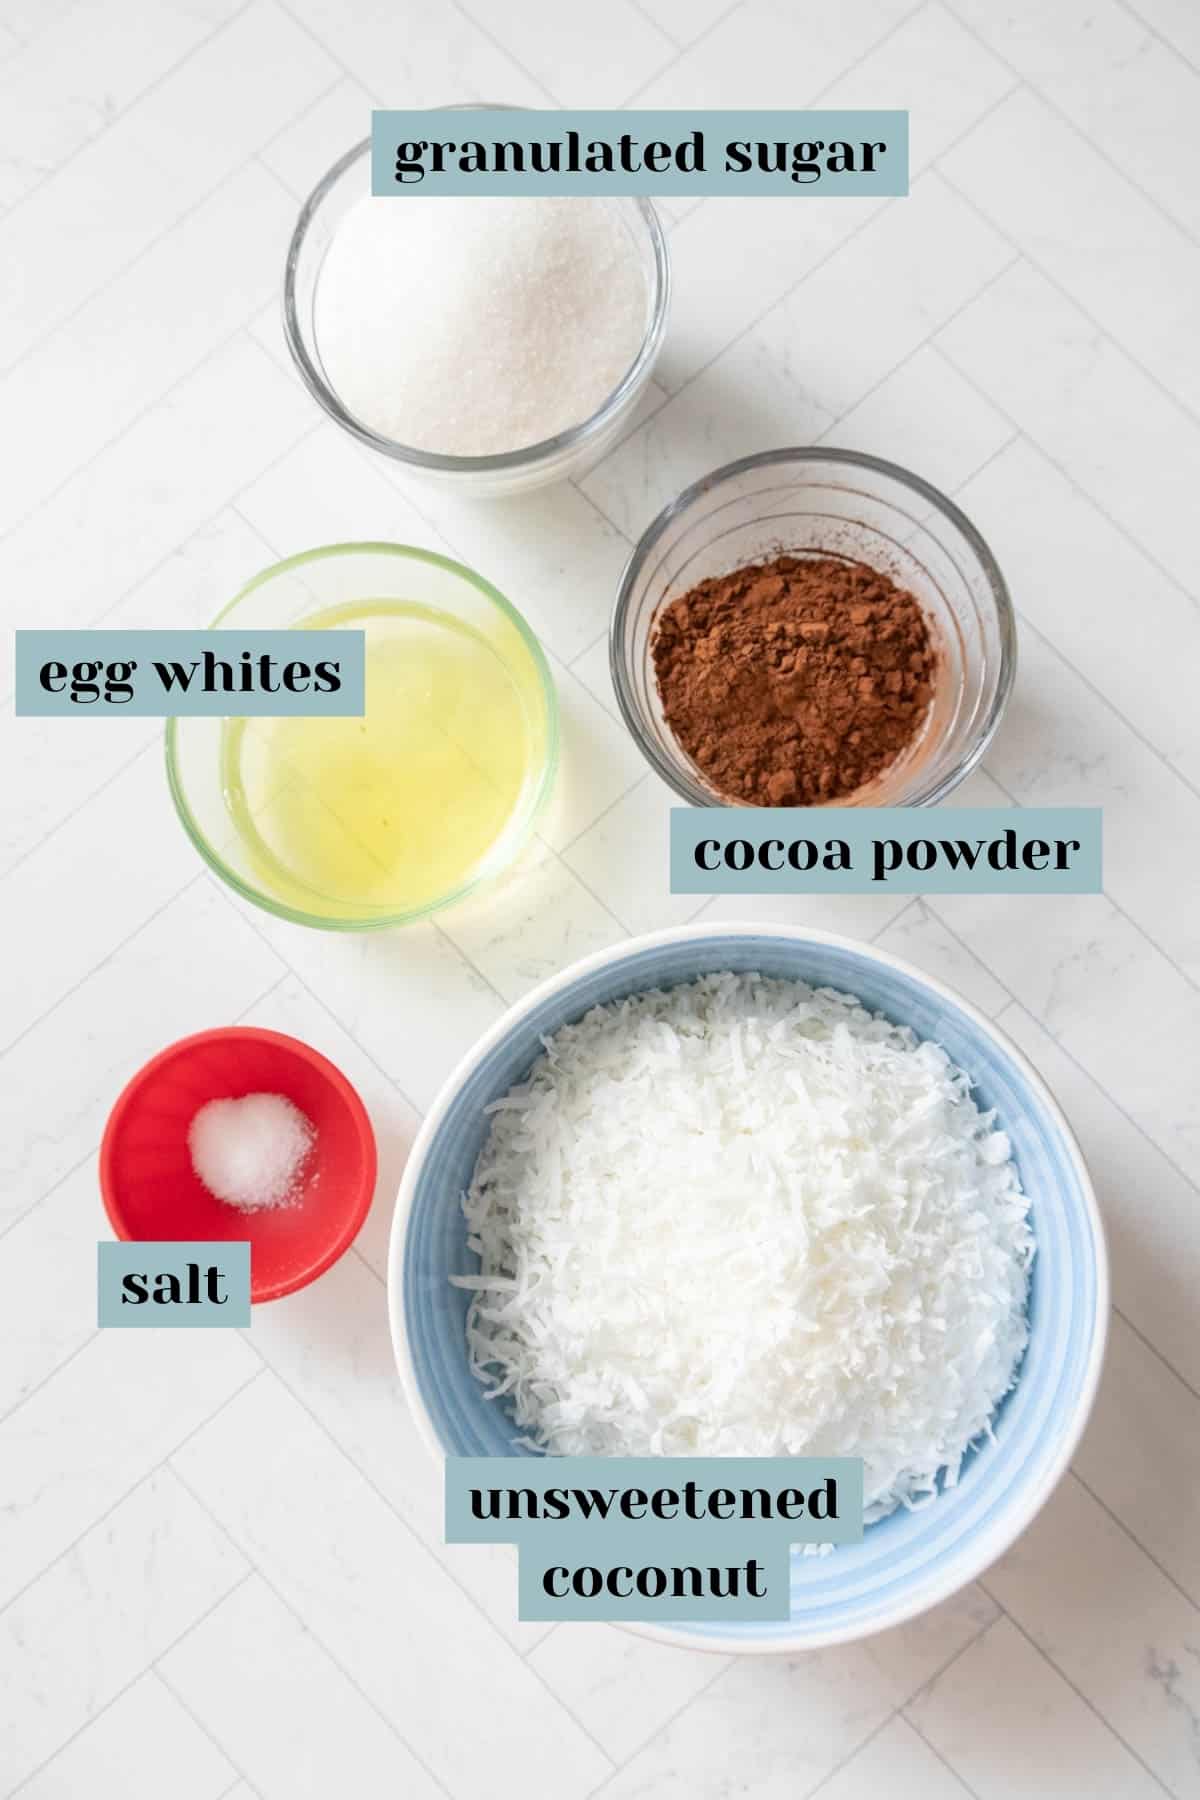 The ingredients for a coconut macaroon recipe.